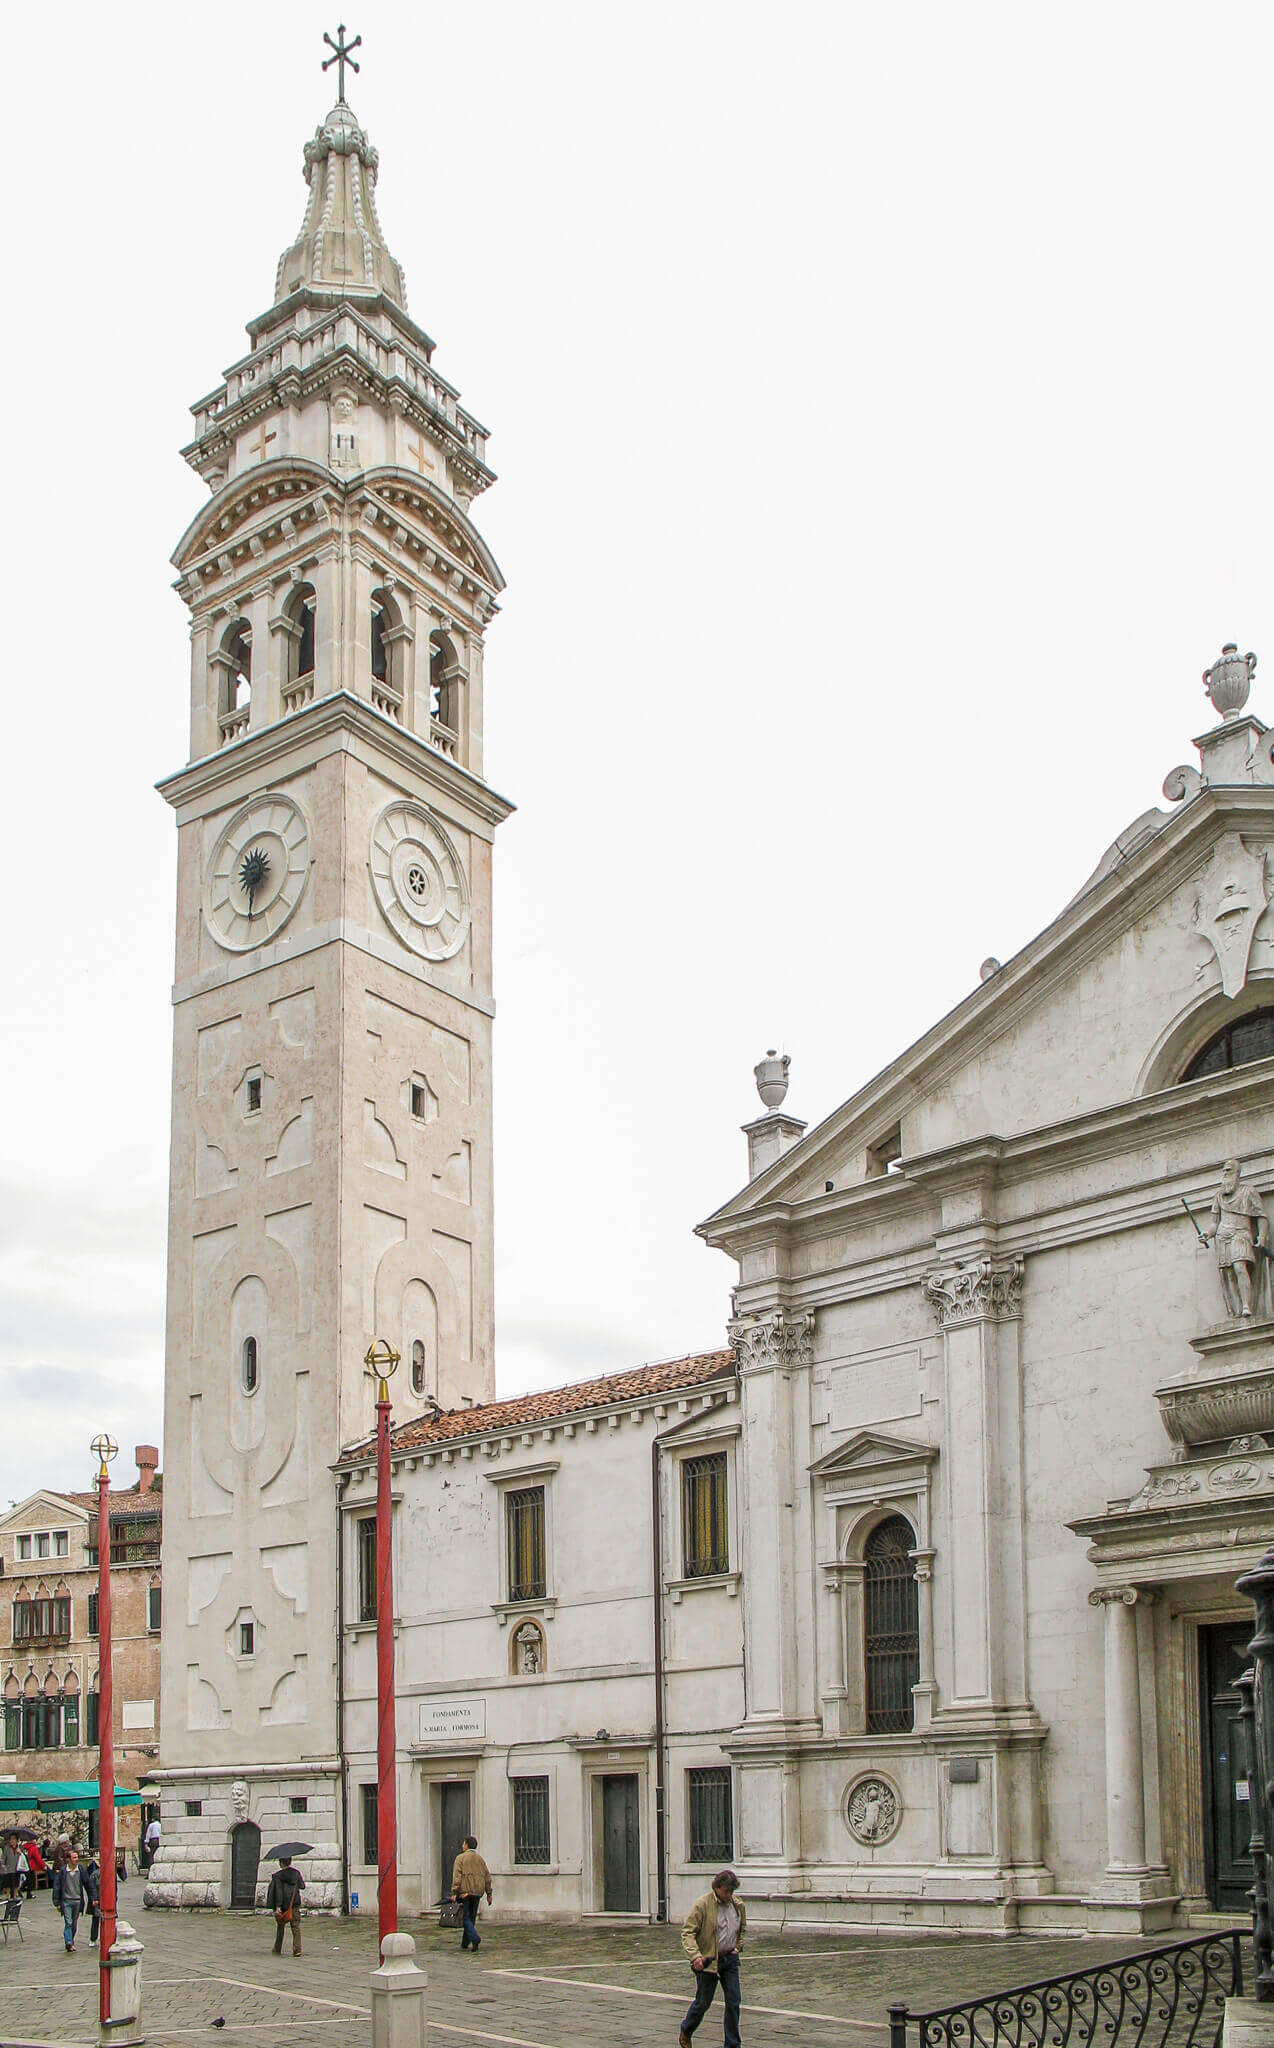 The bell tower of Santa Maria Formosa in Venice